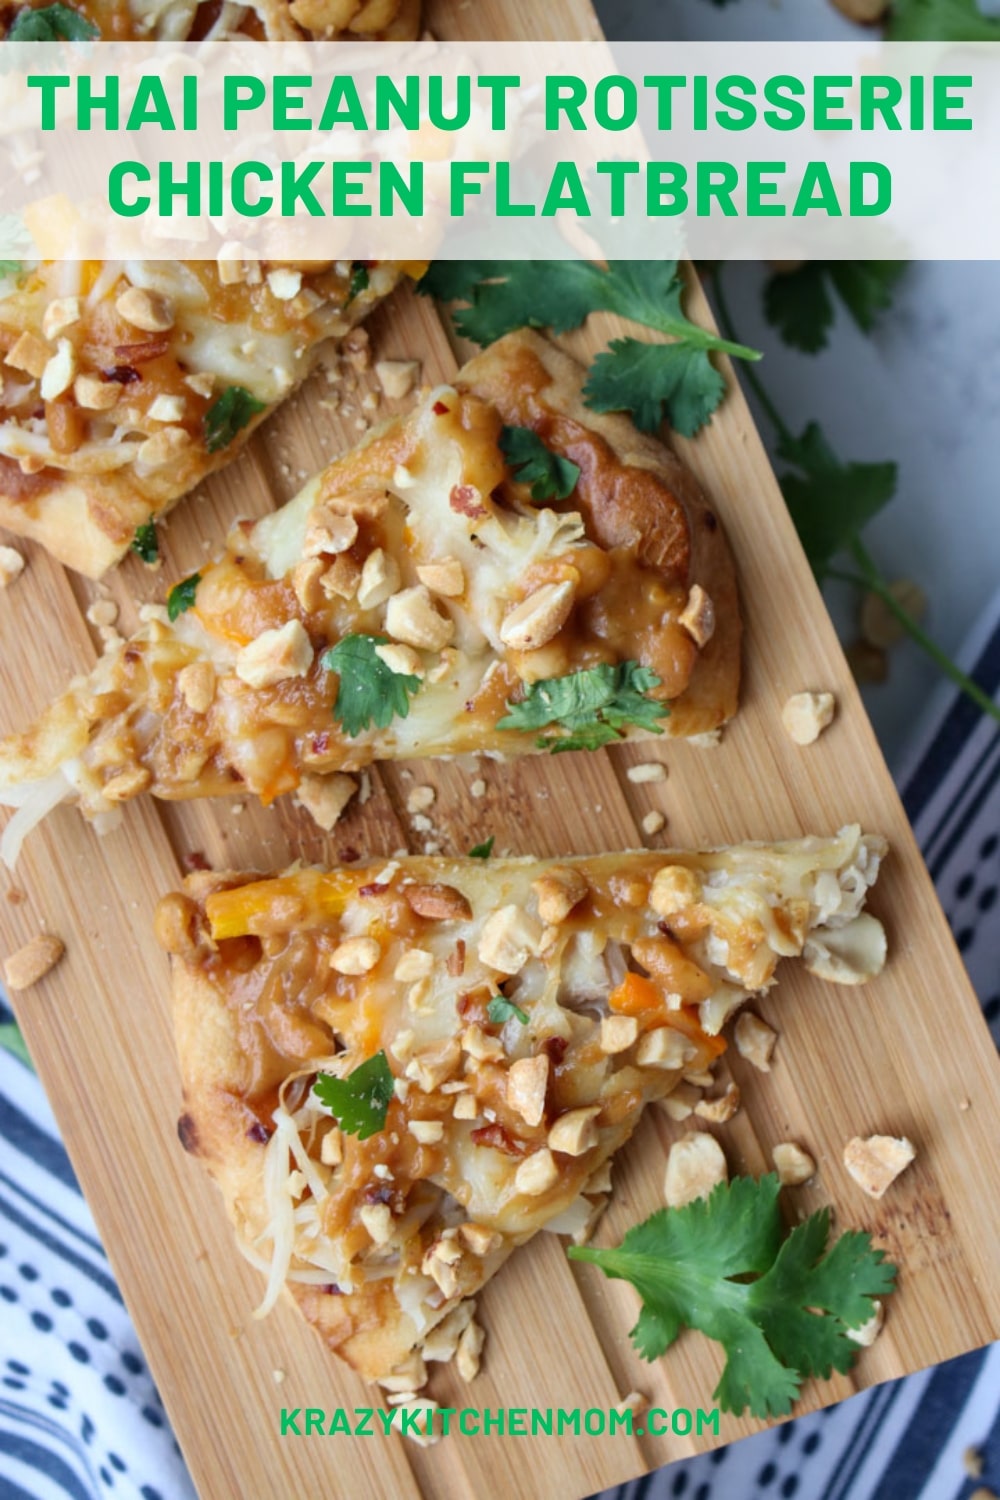 Transform everyday naan bread into a spicy savory treat. And better yet, it’s made with rotisserie chicken for quick preparation. via @krazykitchenmom